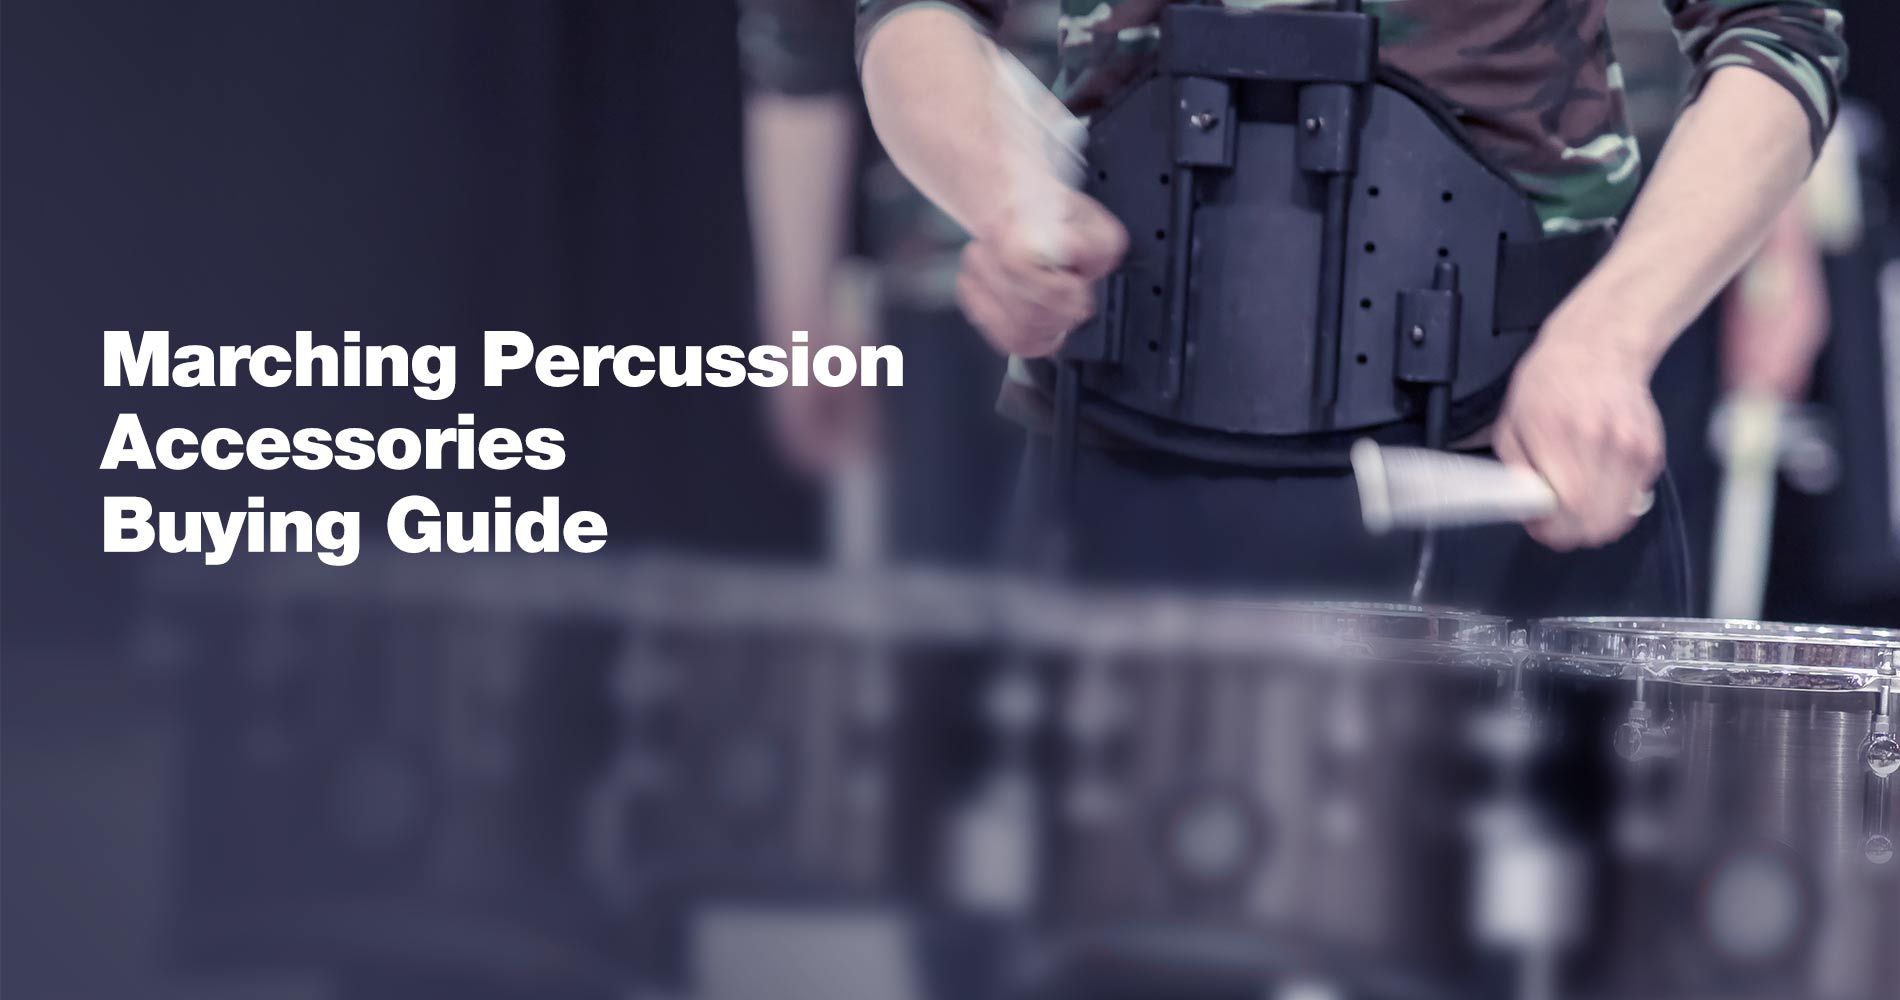 Marching Percussion Accessories Buying Guide